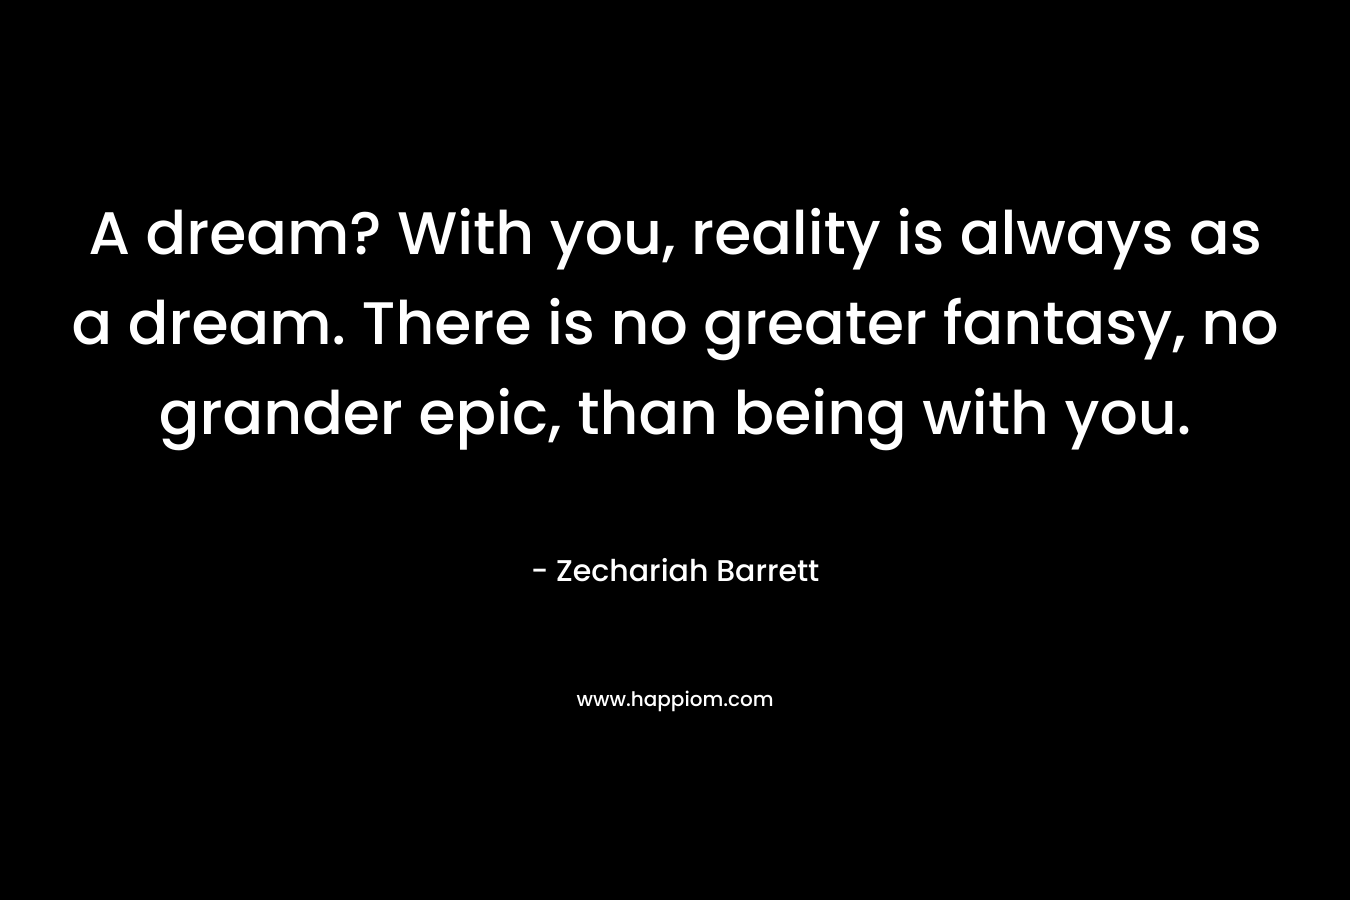 A dream? With you, reality is always as a dream. There is no greater fantasy, no grander epic, than being with you.